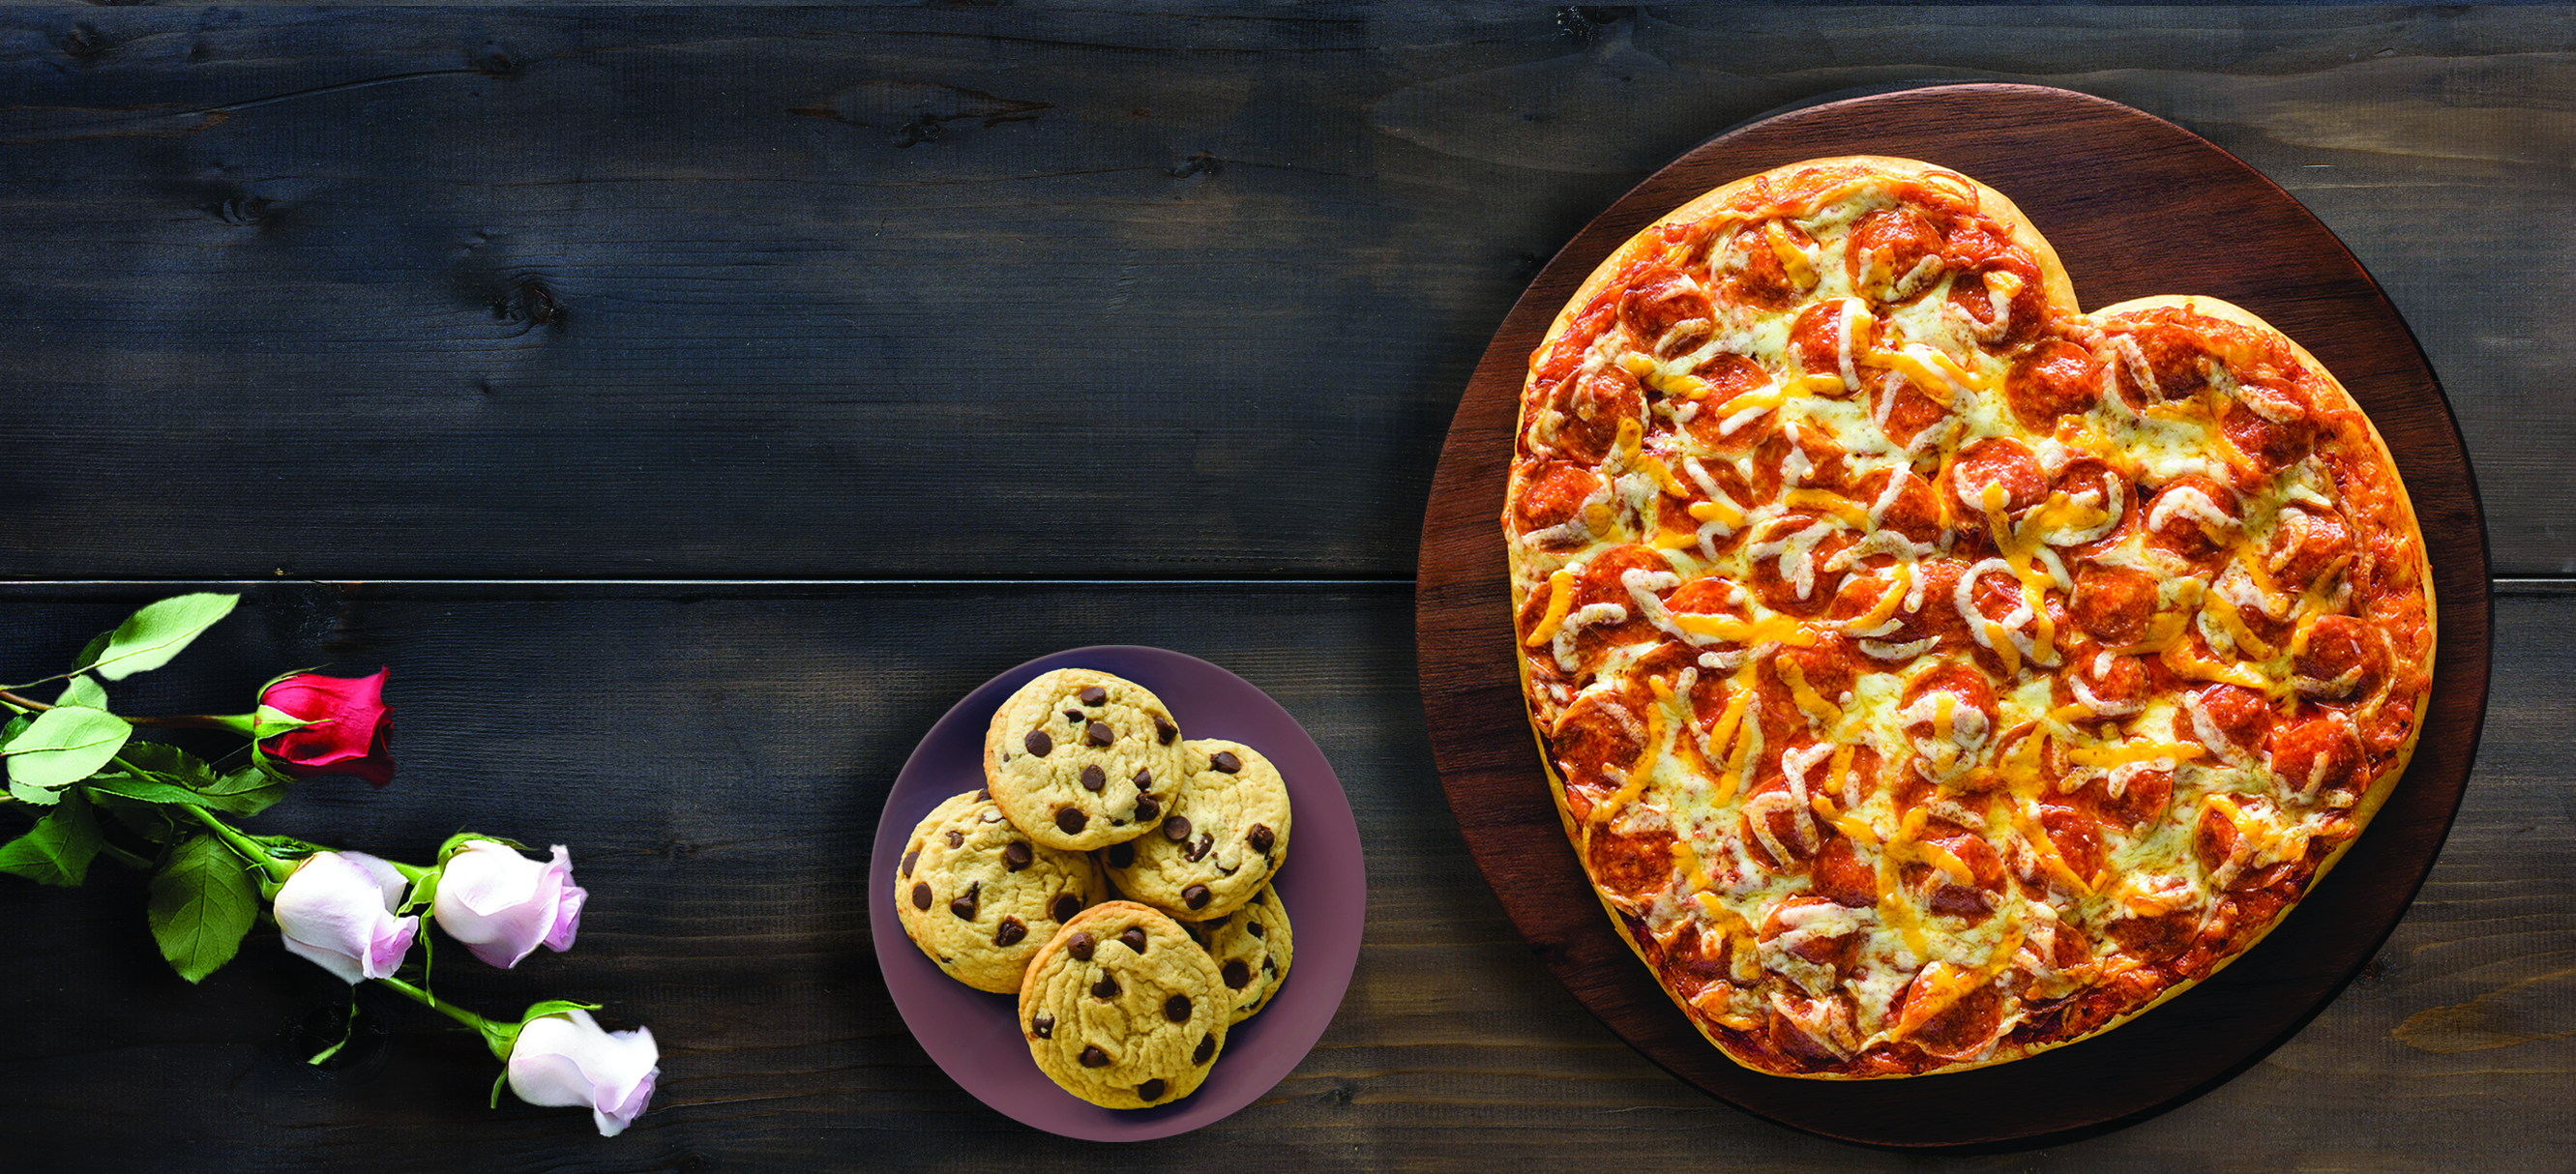 Celebrate Love at 425° this Valentine’s Day with Papa Murphy’s HeartBaker® Pizza